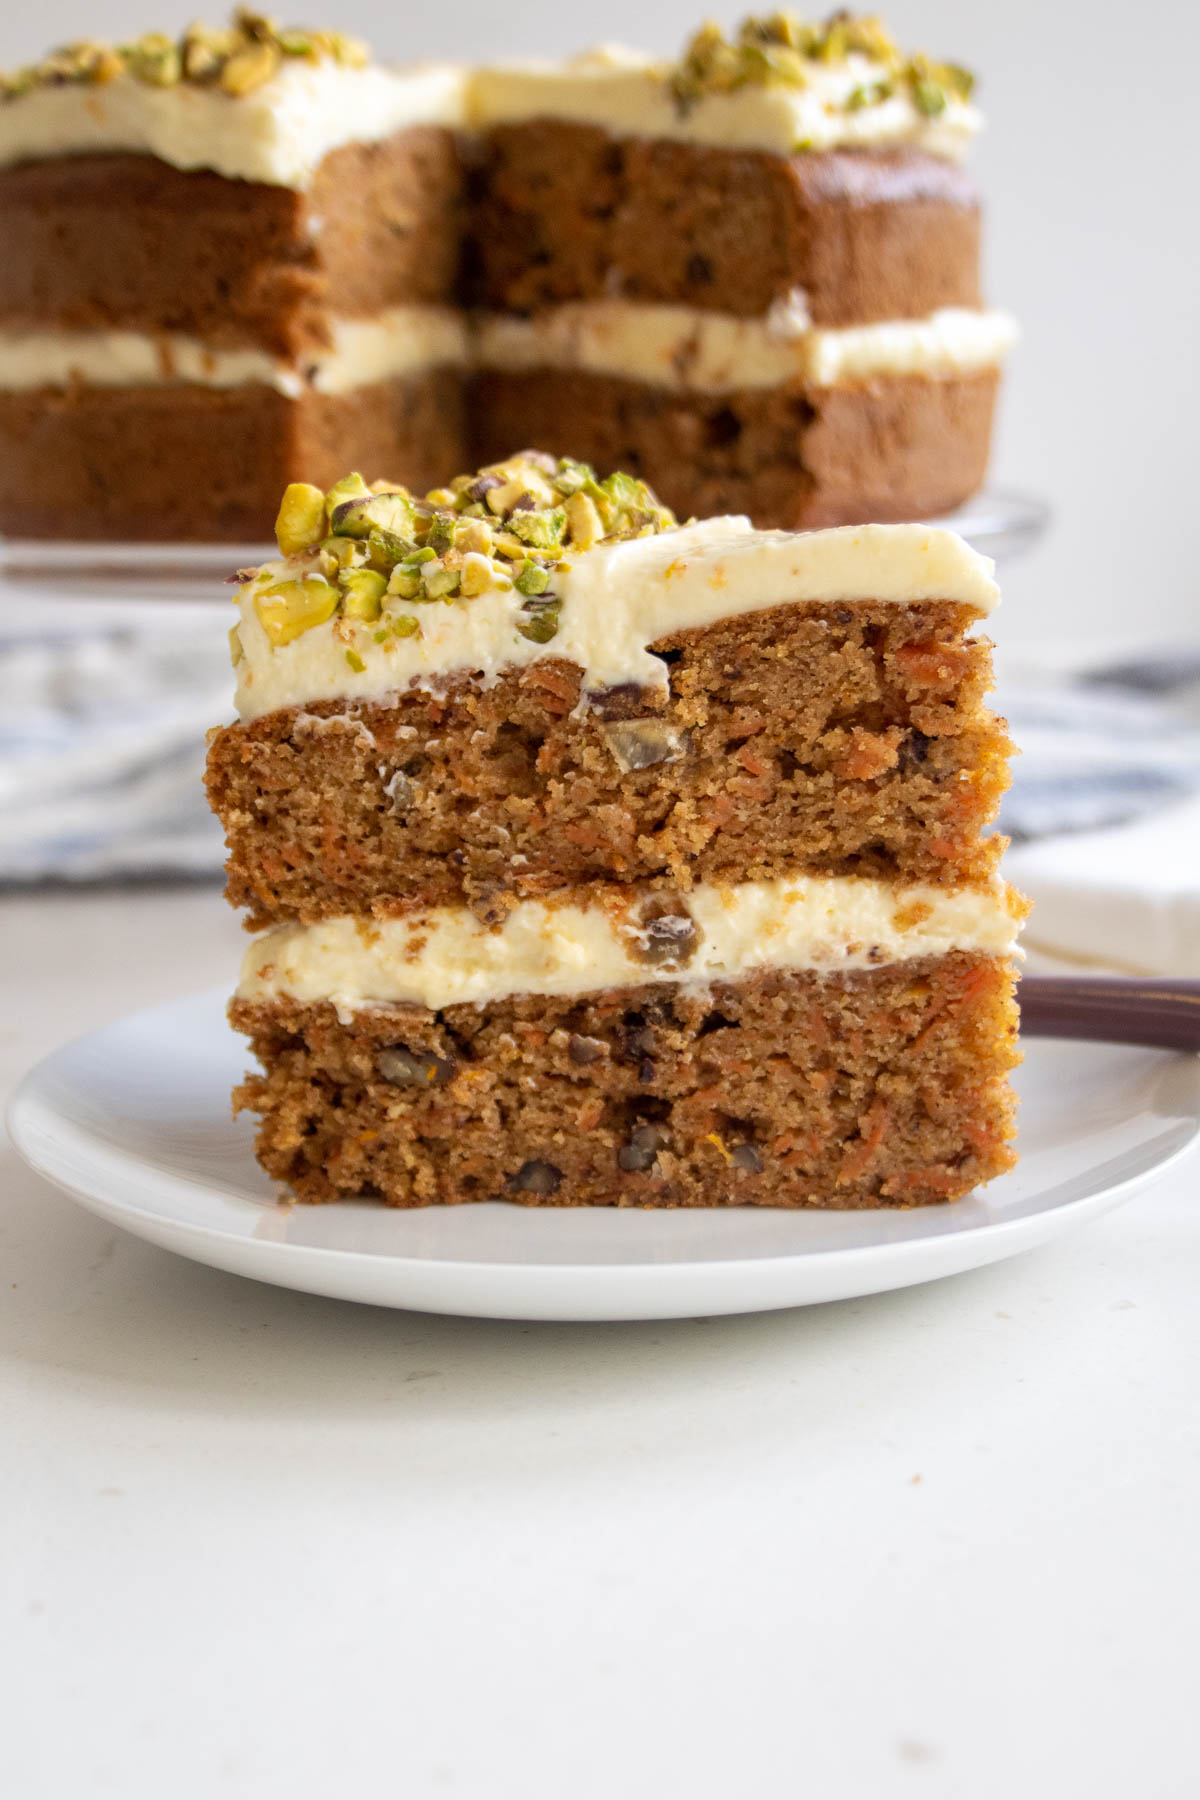 a slice of sugar free carrot cake on a plate